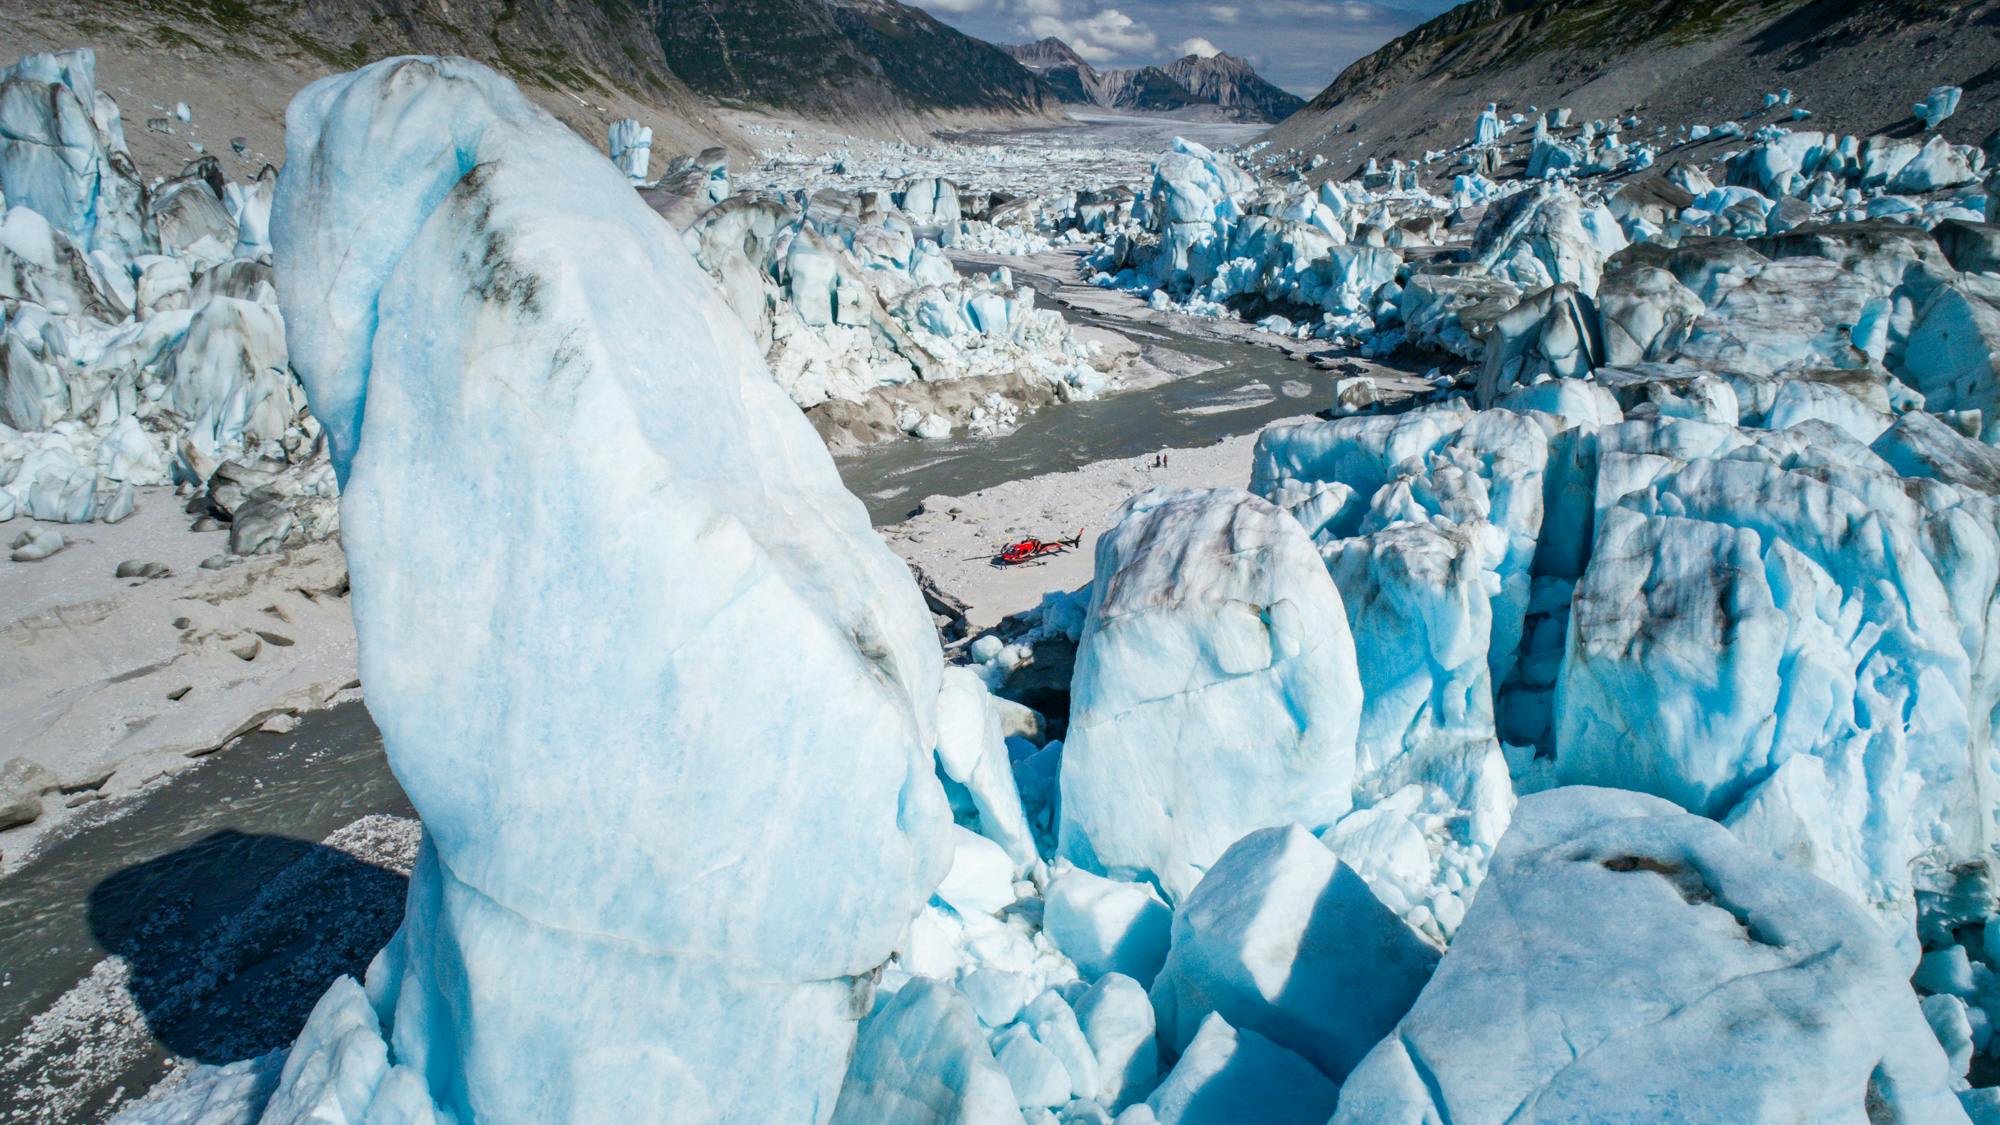 The extraordinary wonder of being surrounded by glaciers.